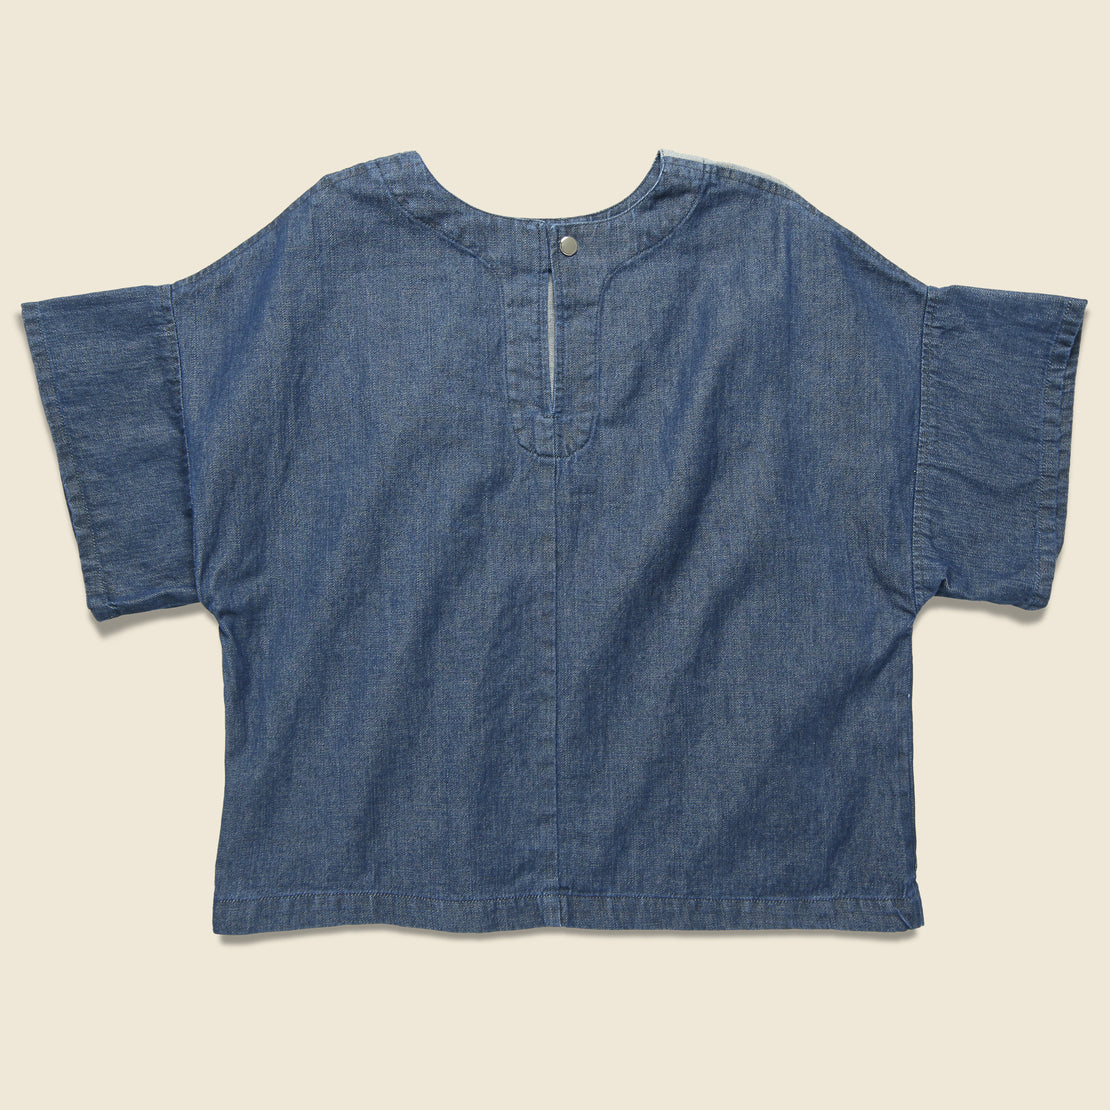 Web Denim Shirt - Blue Two-Tone - Carleen - STAG Provisions - W - Tops - S/S Woven